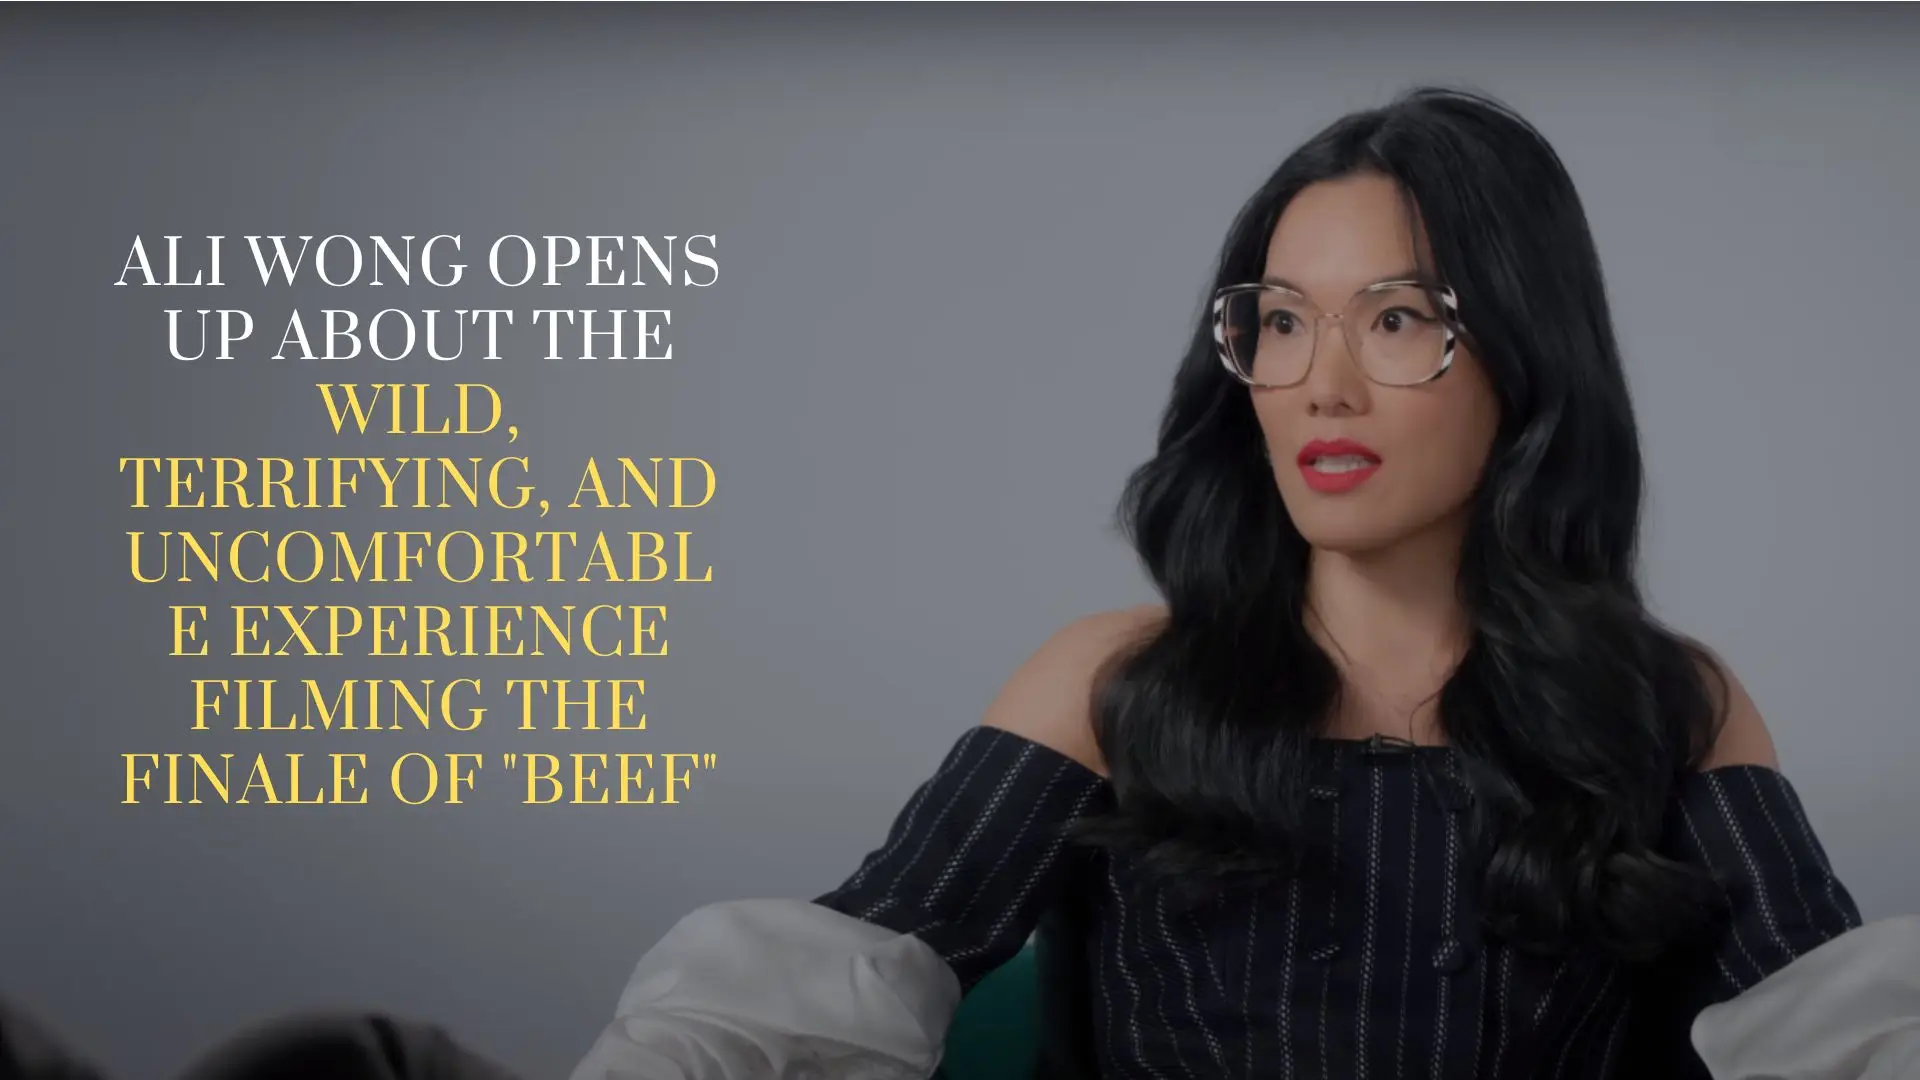 Ali Wong Opens Up About the Wild, Terrifying, and Uncomfortable Experience Filming the Finale of "Beef"